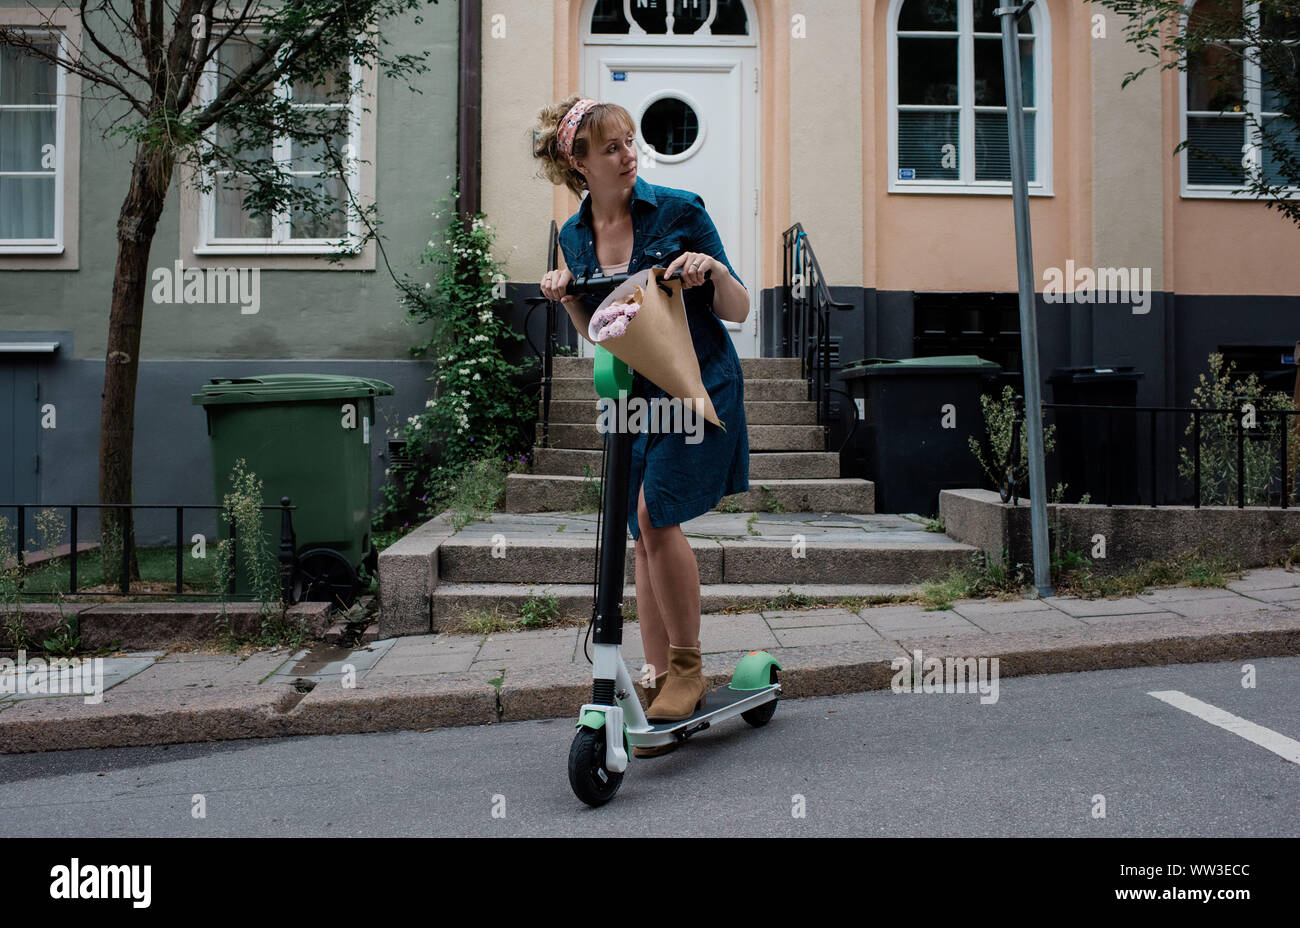 woman travelling on a city rental scooter holding flowers Stock Photo